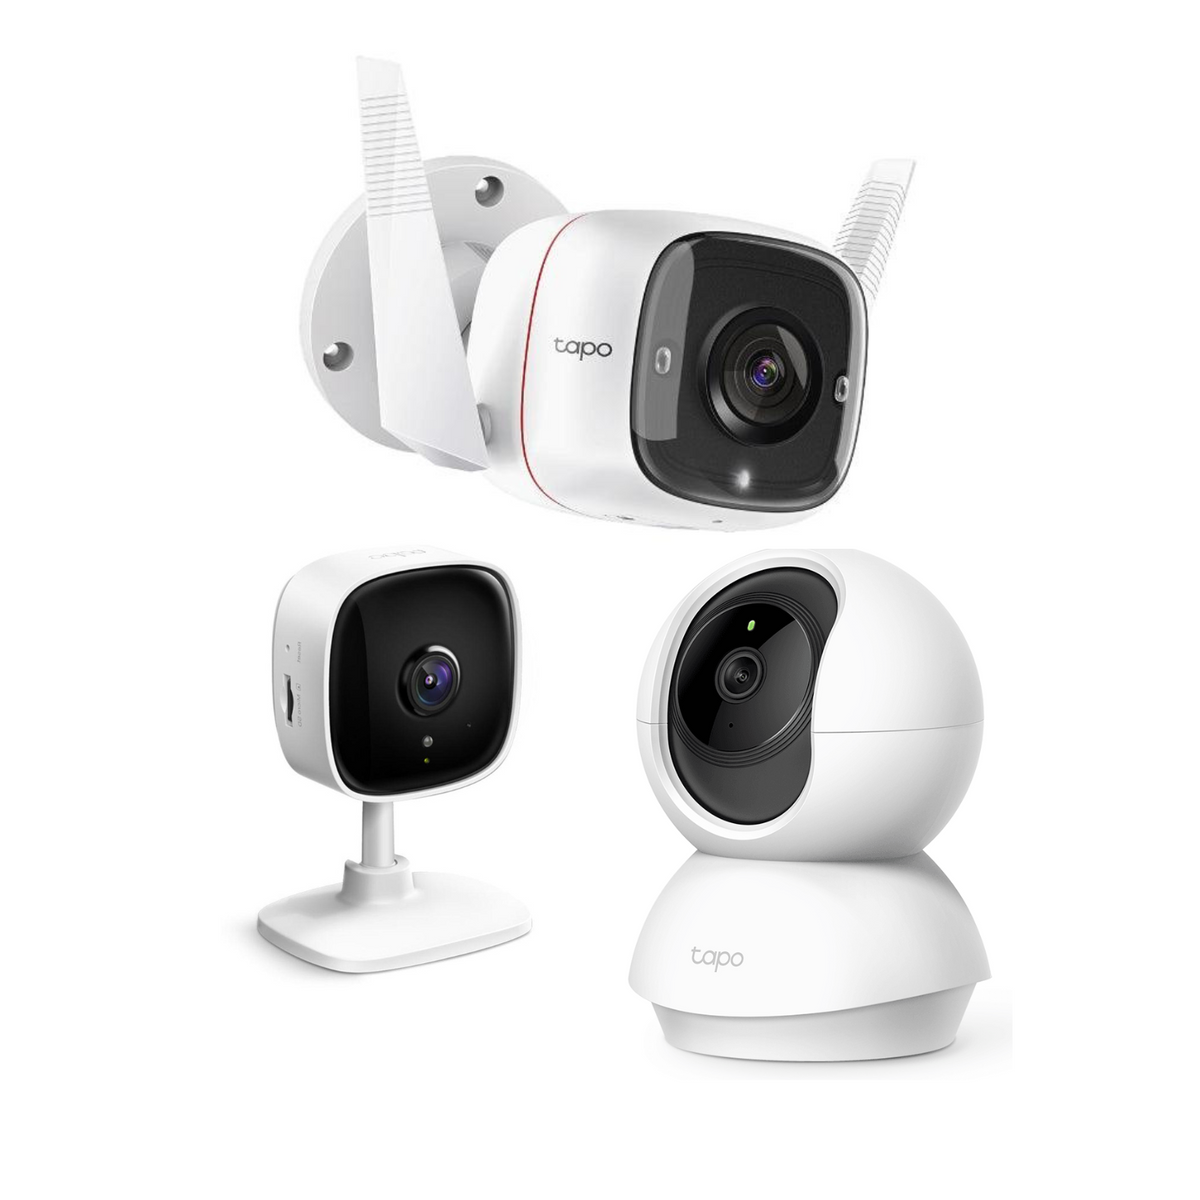 TP Link 3MP Outdoor Security Wi-Fi Camera Bundle - White | TAPOINDOORPACKAGE1 from TP Link - DID Electrical